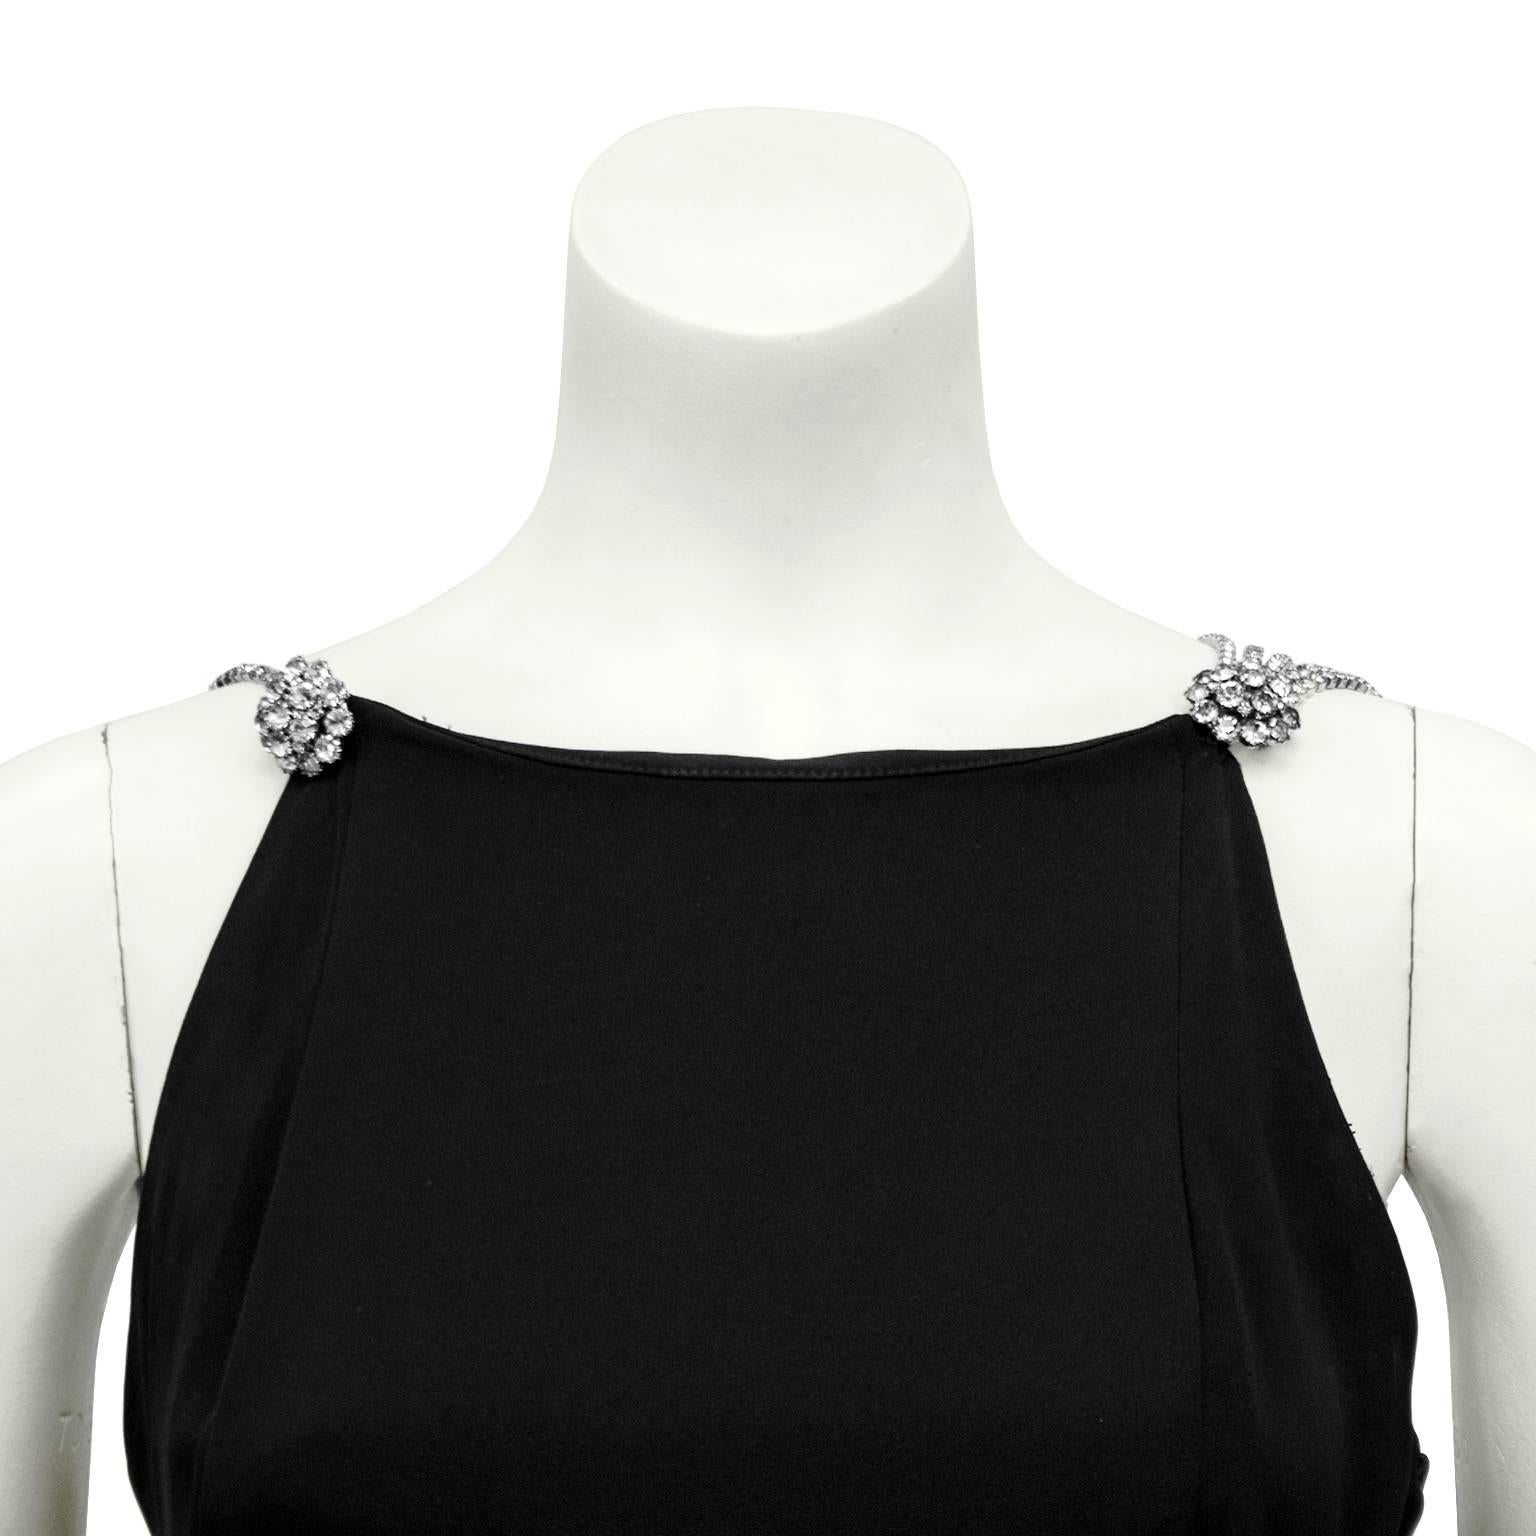 Bill Blass Black Silk Gown with Rhinestone Straps and Details, 1960s   In Excellent Condition For Sale In Toronto, Ontario